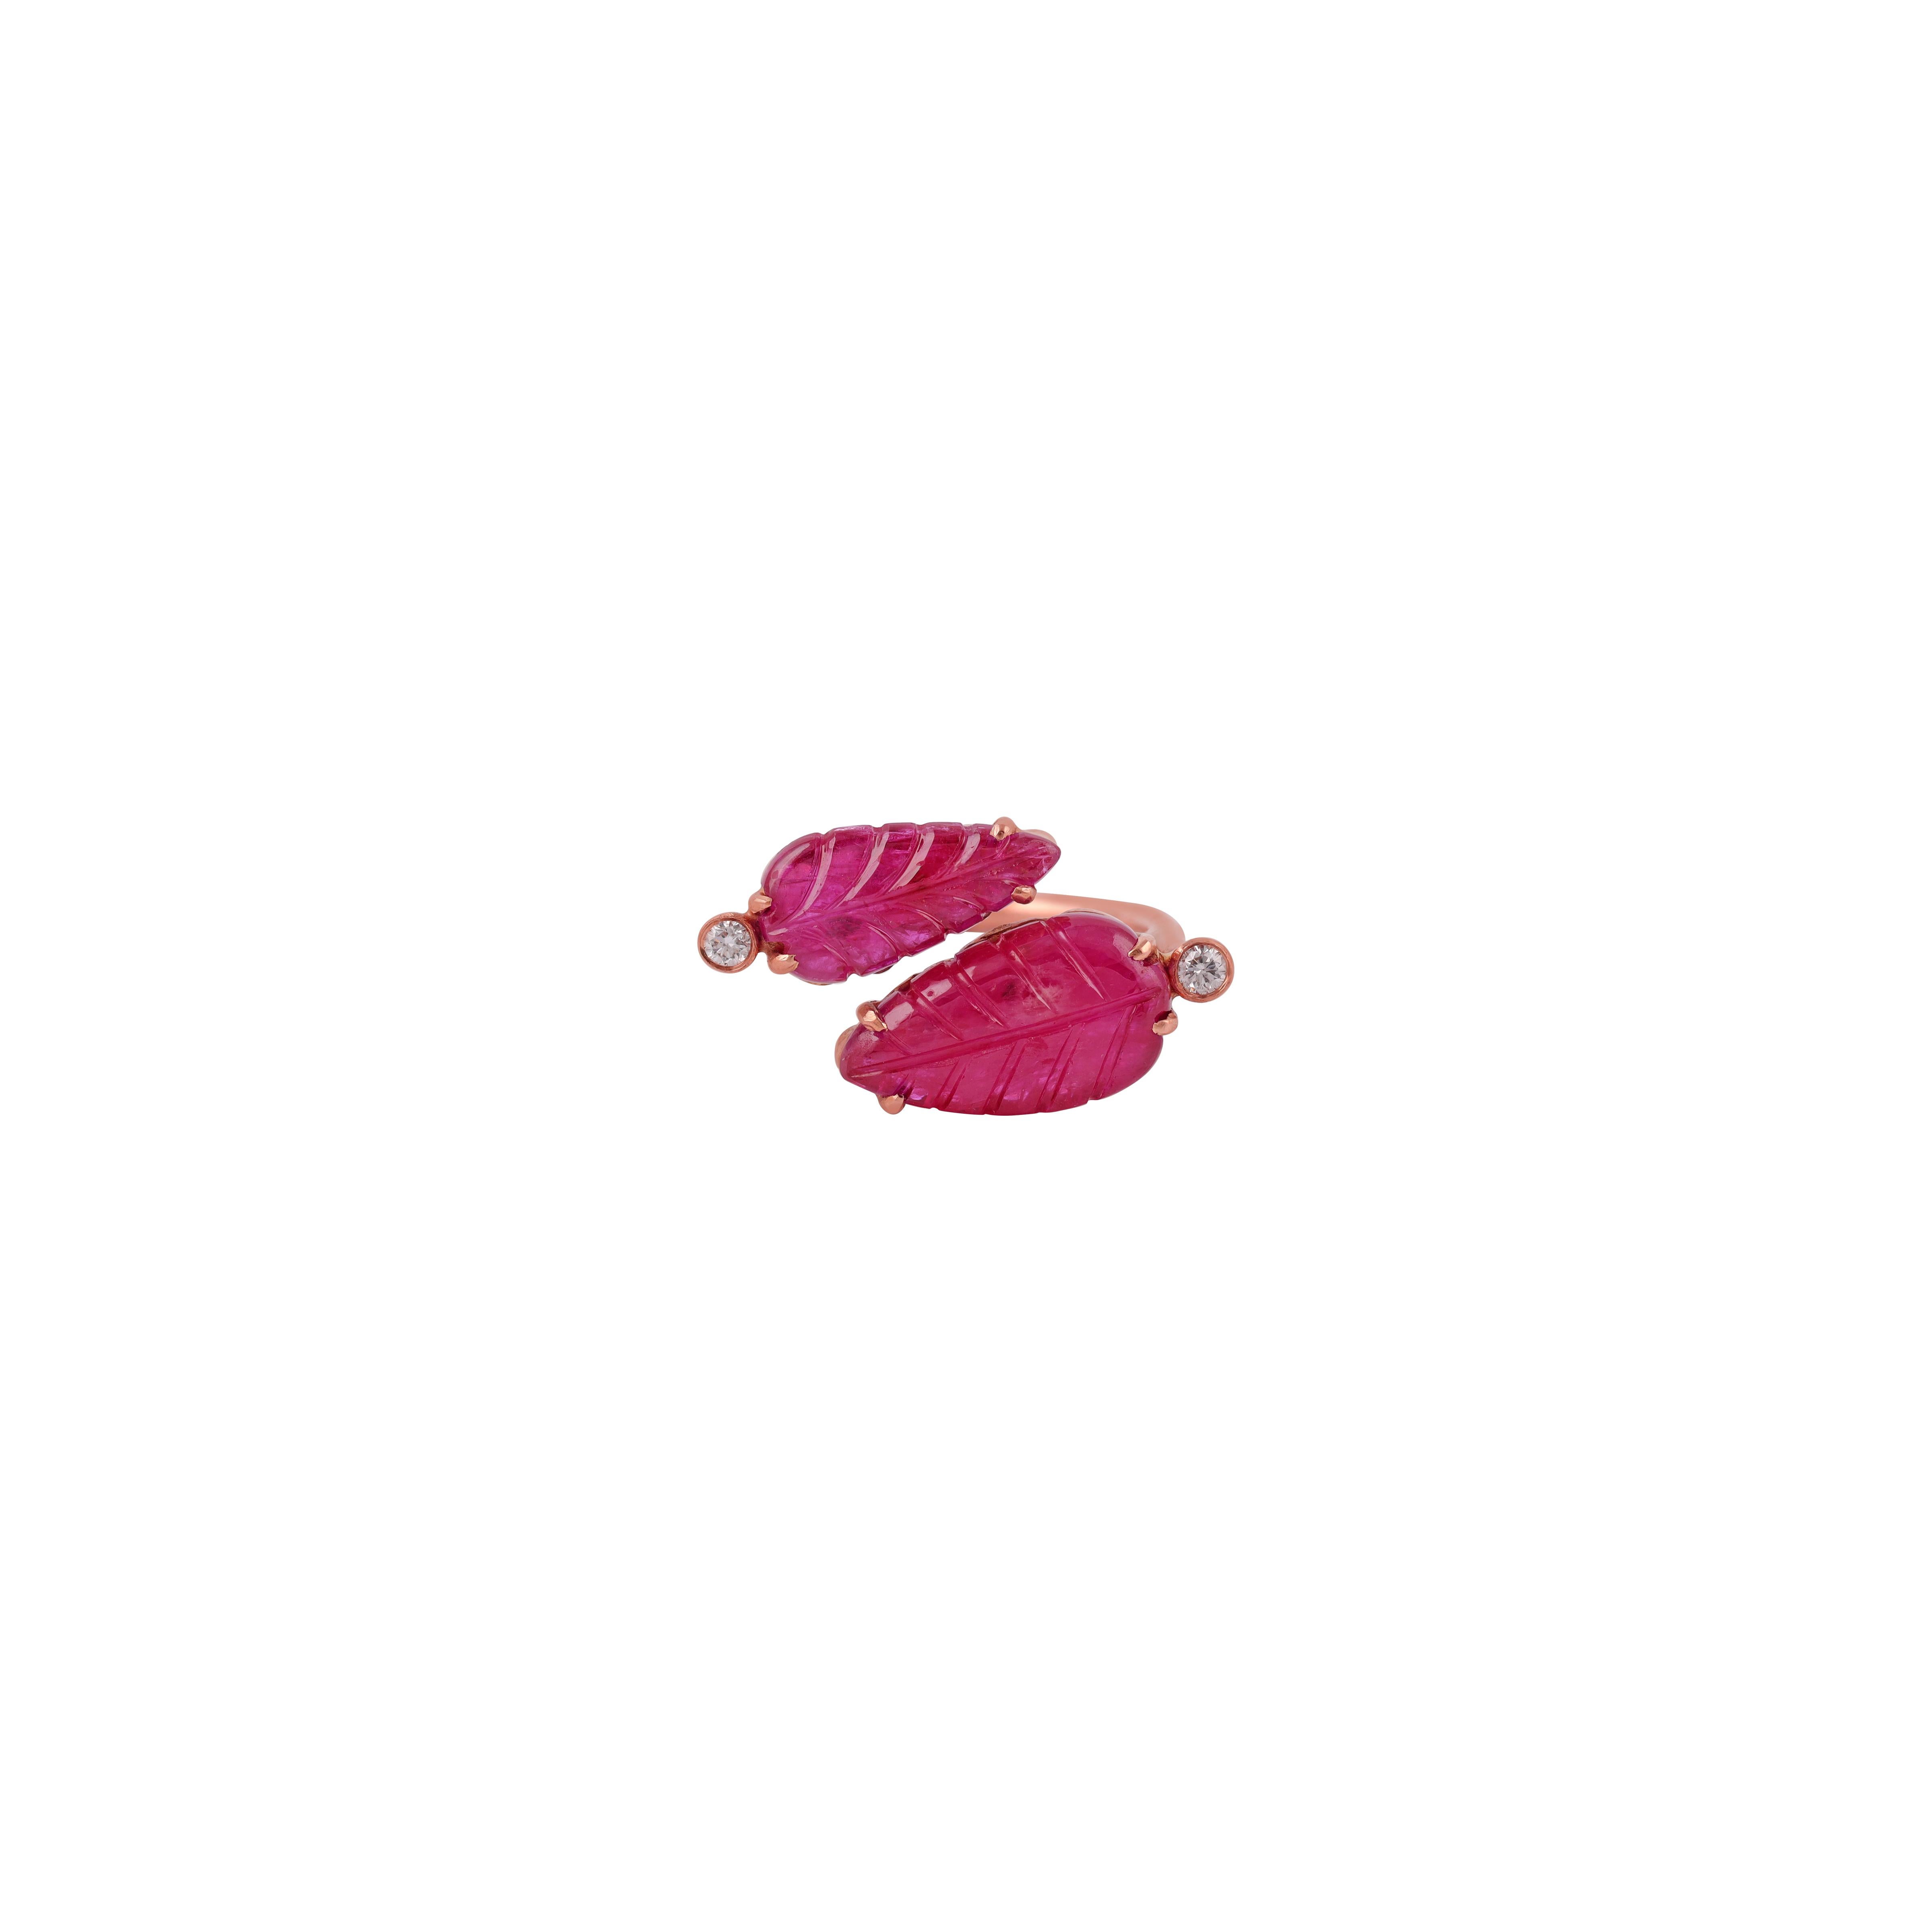 Carved Leaf  Ruby with  diamonds around this ring is a very attractive and beautiful looking.

Ring size: 7 ( Can be sized for a cost )

18k : 4.41 gms
Diamond : 0.08 Cts
Ruby: 5.31 Cts

